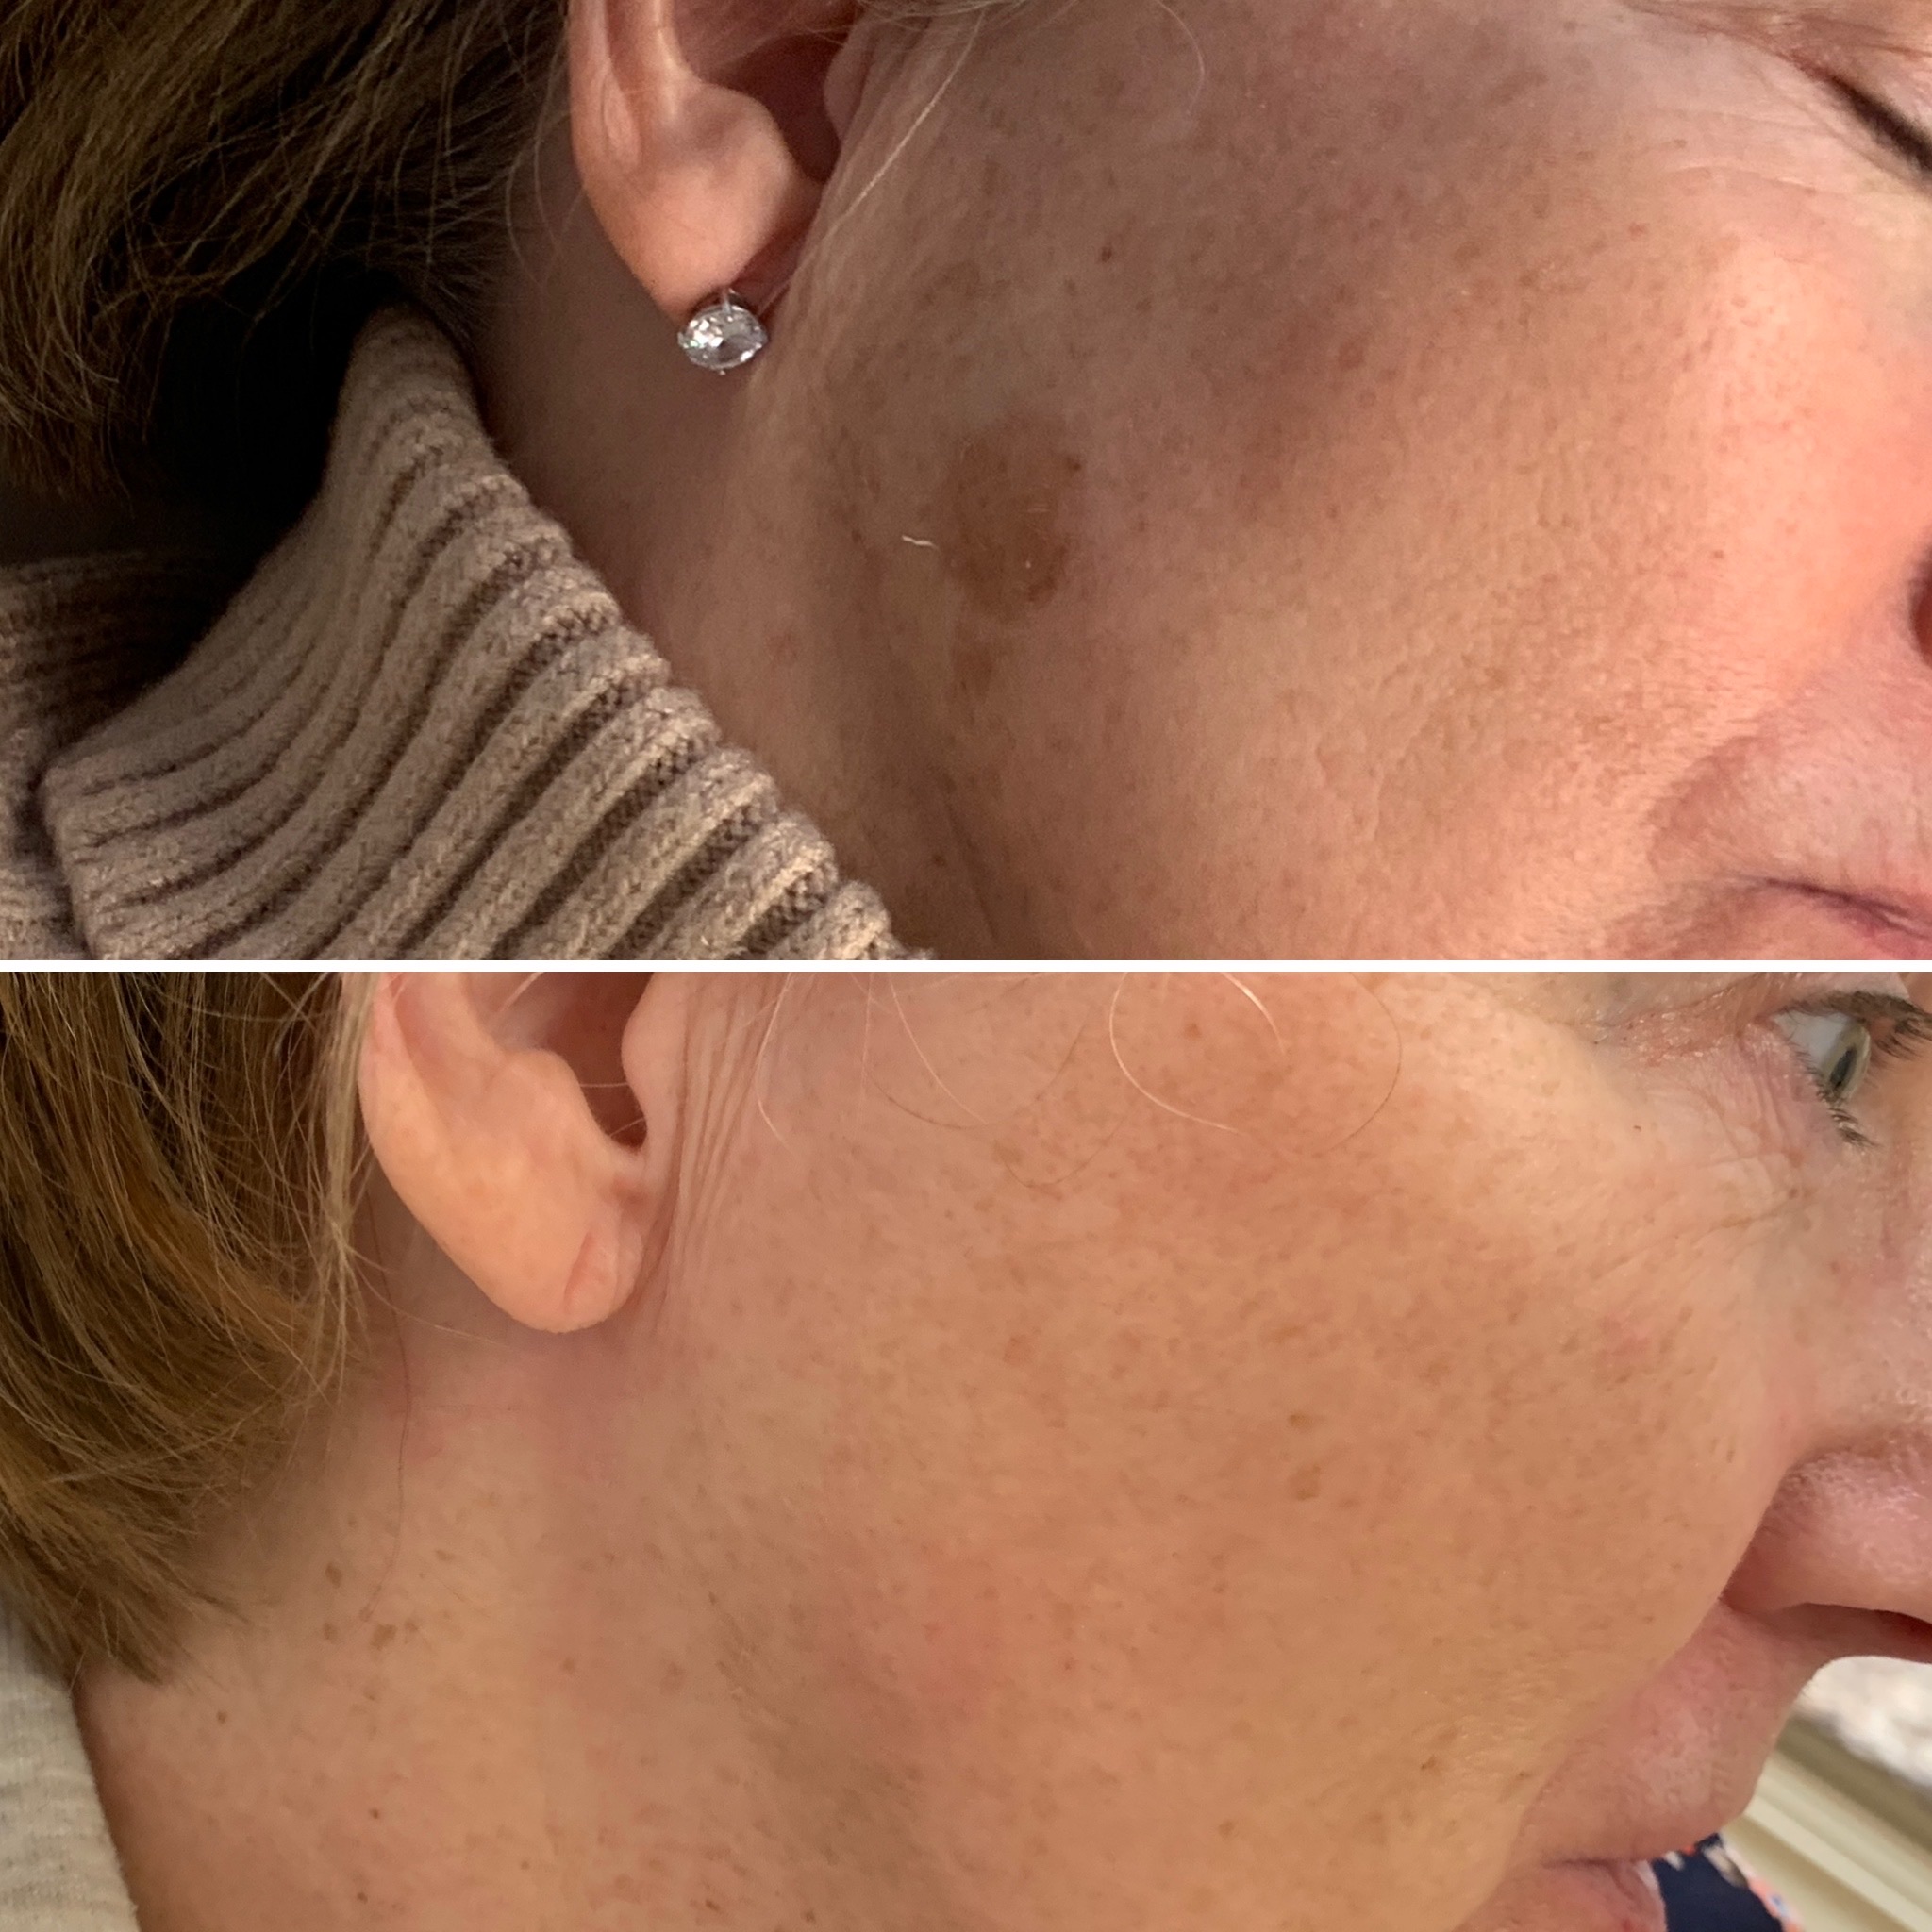 Laser-Skin-Resurfacing Treatment Before After | RenovoMD in Northborough, MA